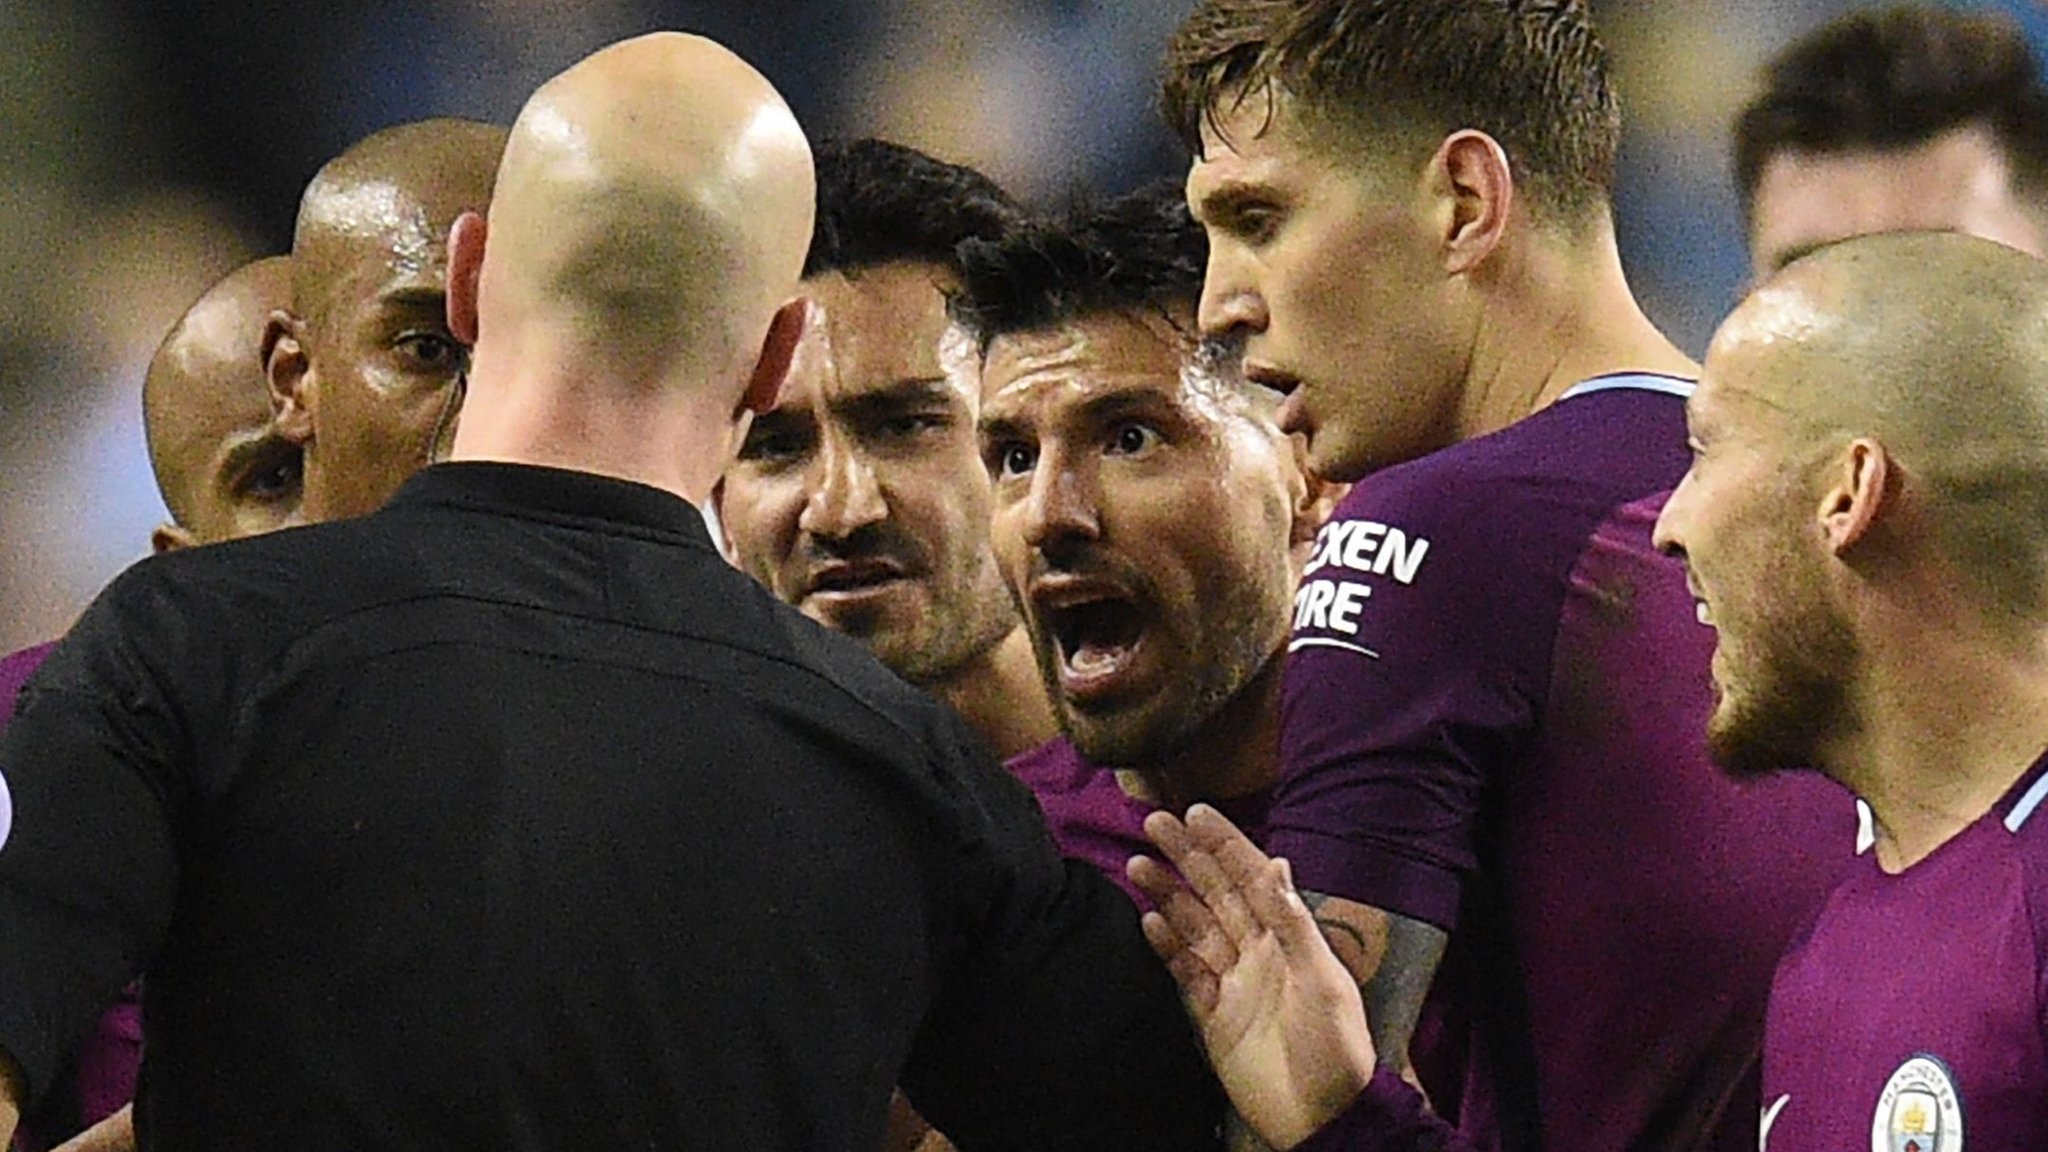 Man City fined £50,000 for failing to control players at Wigan